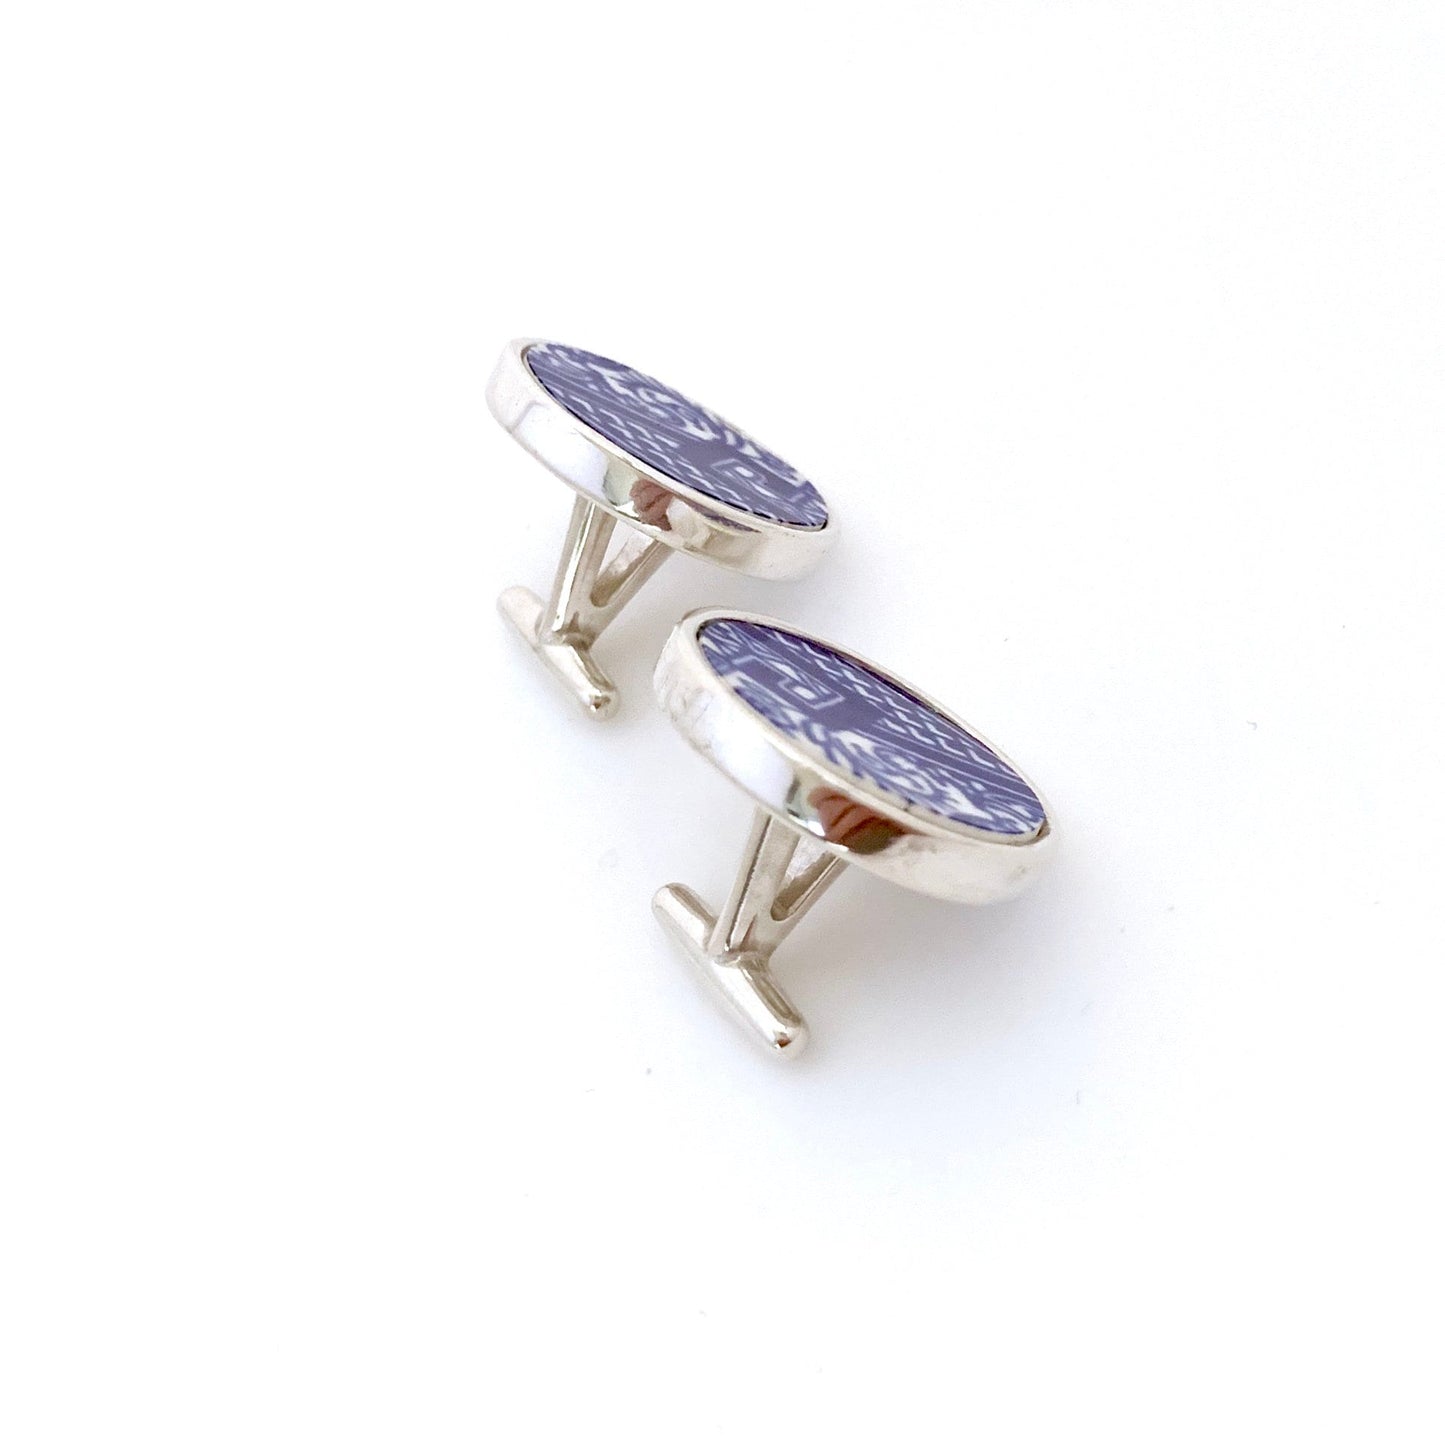 Blue Willow Cufflinks, Broken China Jewelry, Unique Anniversary Gift for Him, Sterling Silver Cuff Links, Gift for Husband